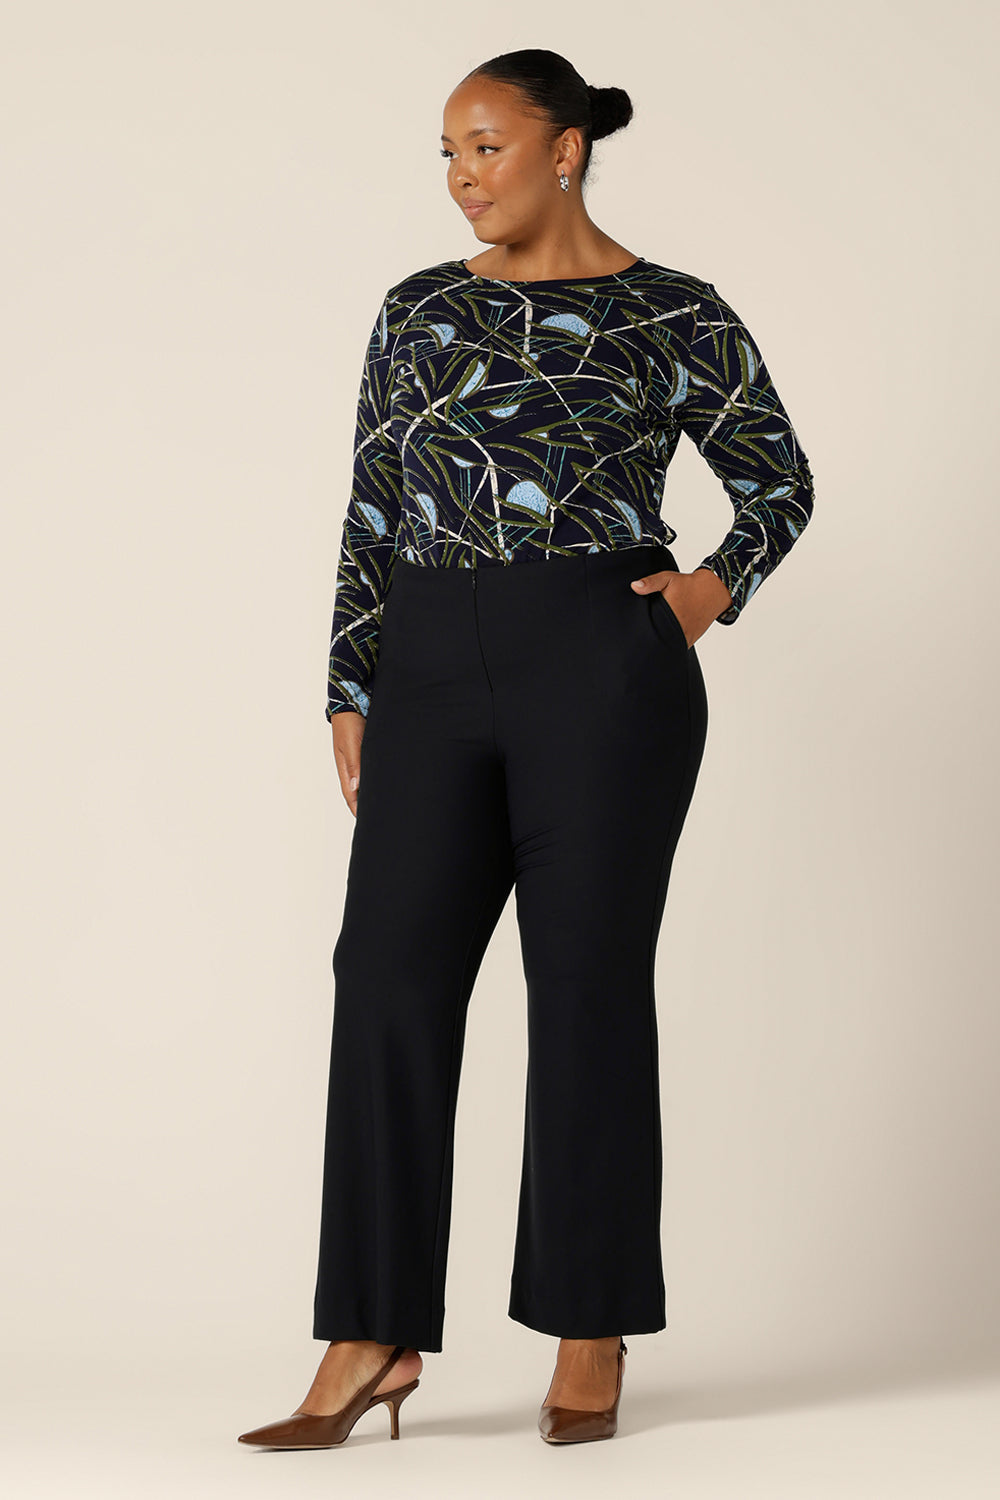 a size 18, plus size woman wears a long sleeve, boat neck top by Australian and New Zealand women's clothing brand, L&F. Featuring a blue, green and white print on a navy jersey base, this top is worn with flared leg, navy pants for a complete work or corporate wear look.